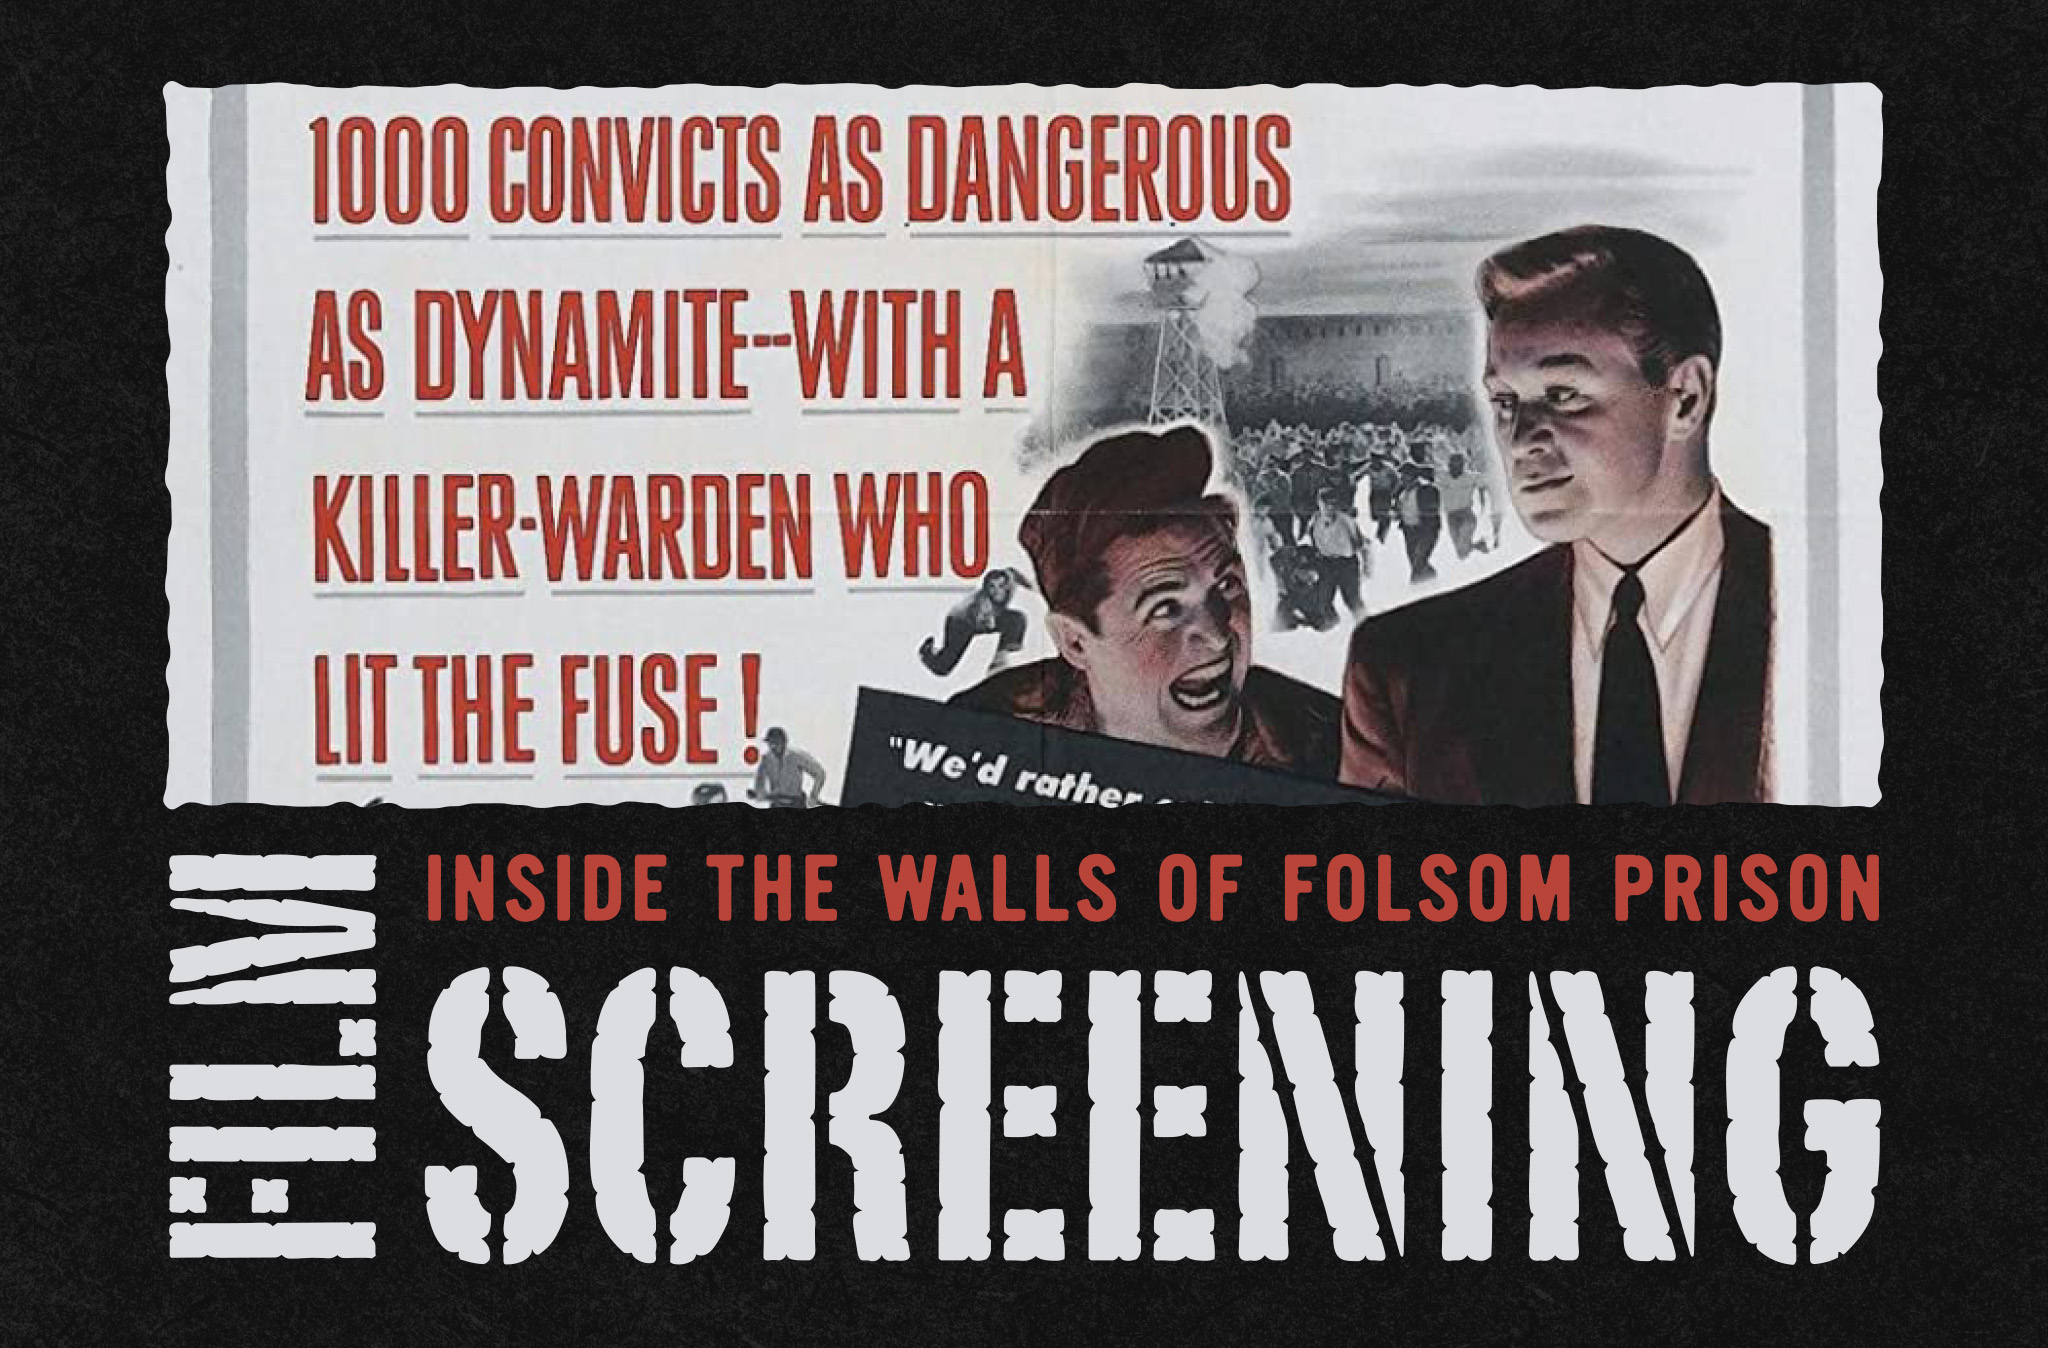 Graphic featuring original artwork from film's movie poster that reads "1000 CONVICTS AS DANGEROUS AS DYNAMITE-WITH A KILLER WARDEN WHO LIT THE FUSE!." In the background there is a prison yard scene. Two men appear in the forefront. One appears to be a prisoner yelling at another man in a suit. The man in the suit is holding a chain.